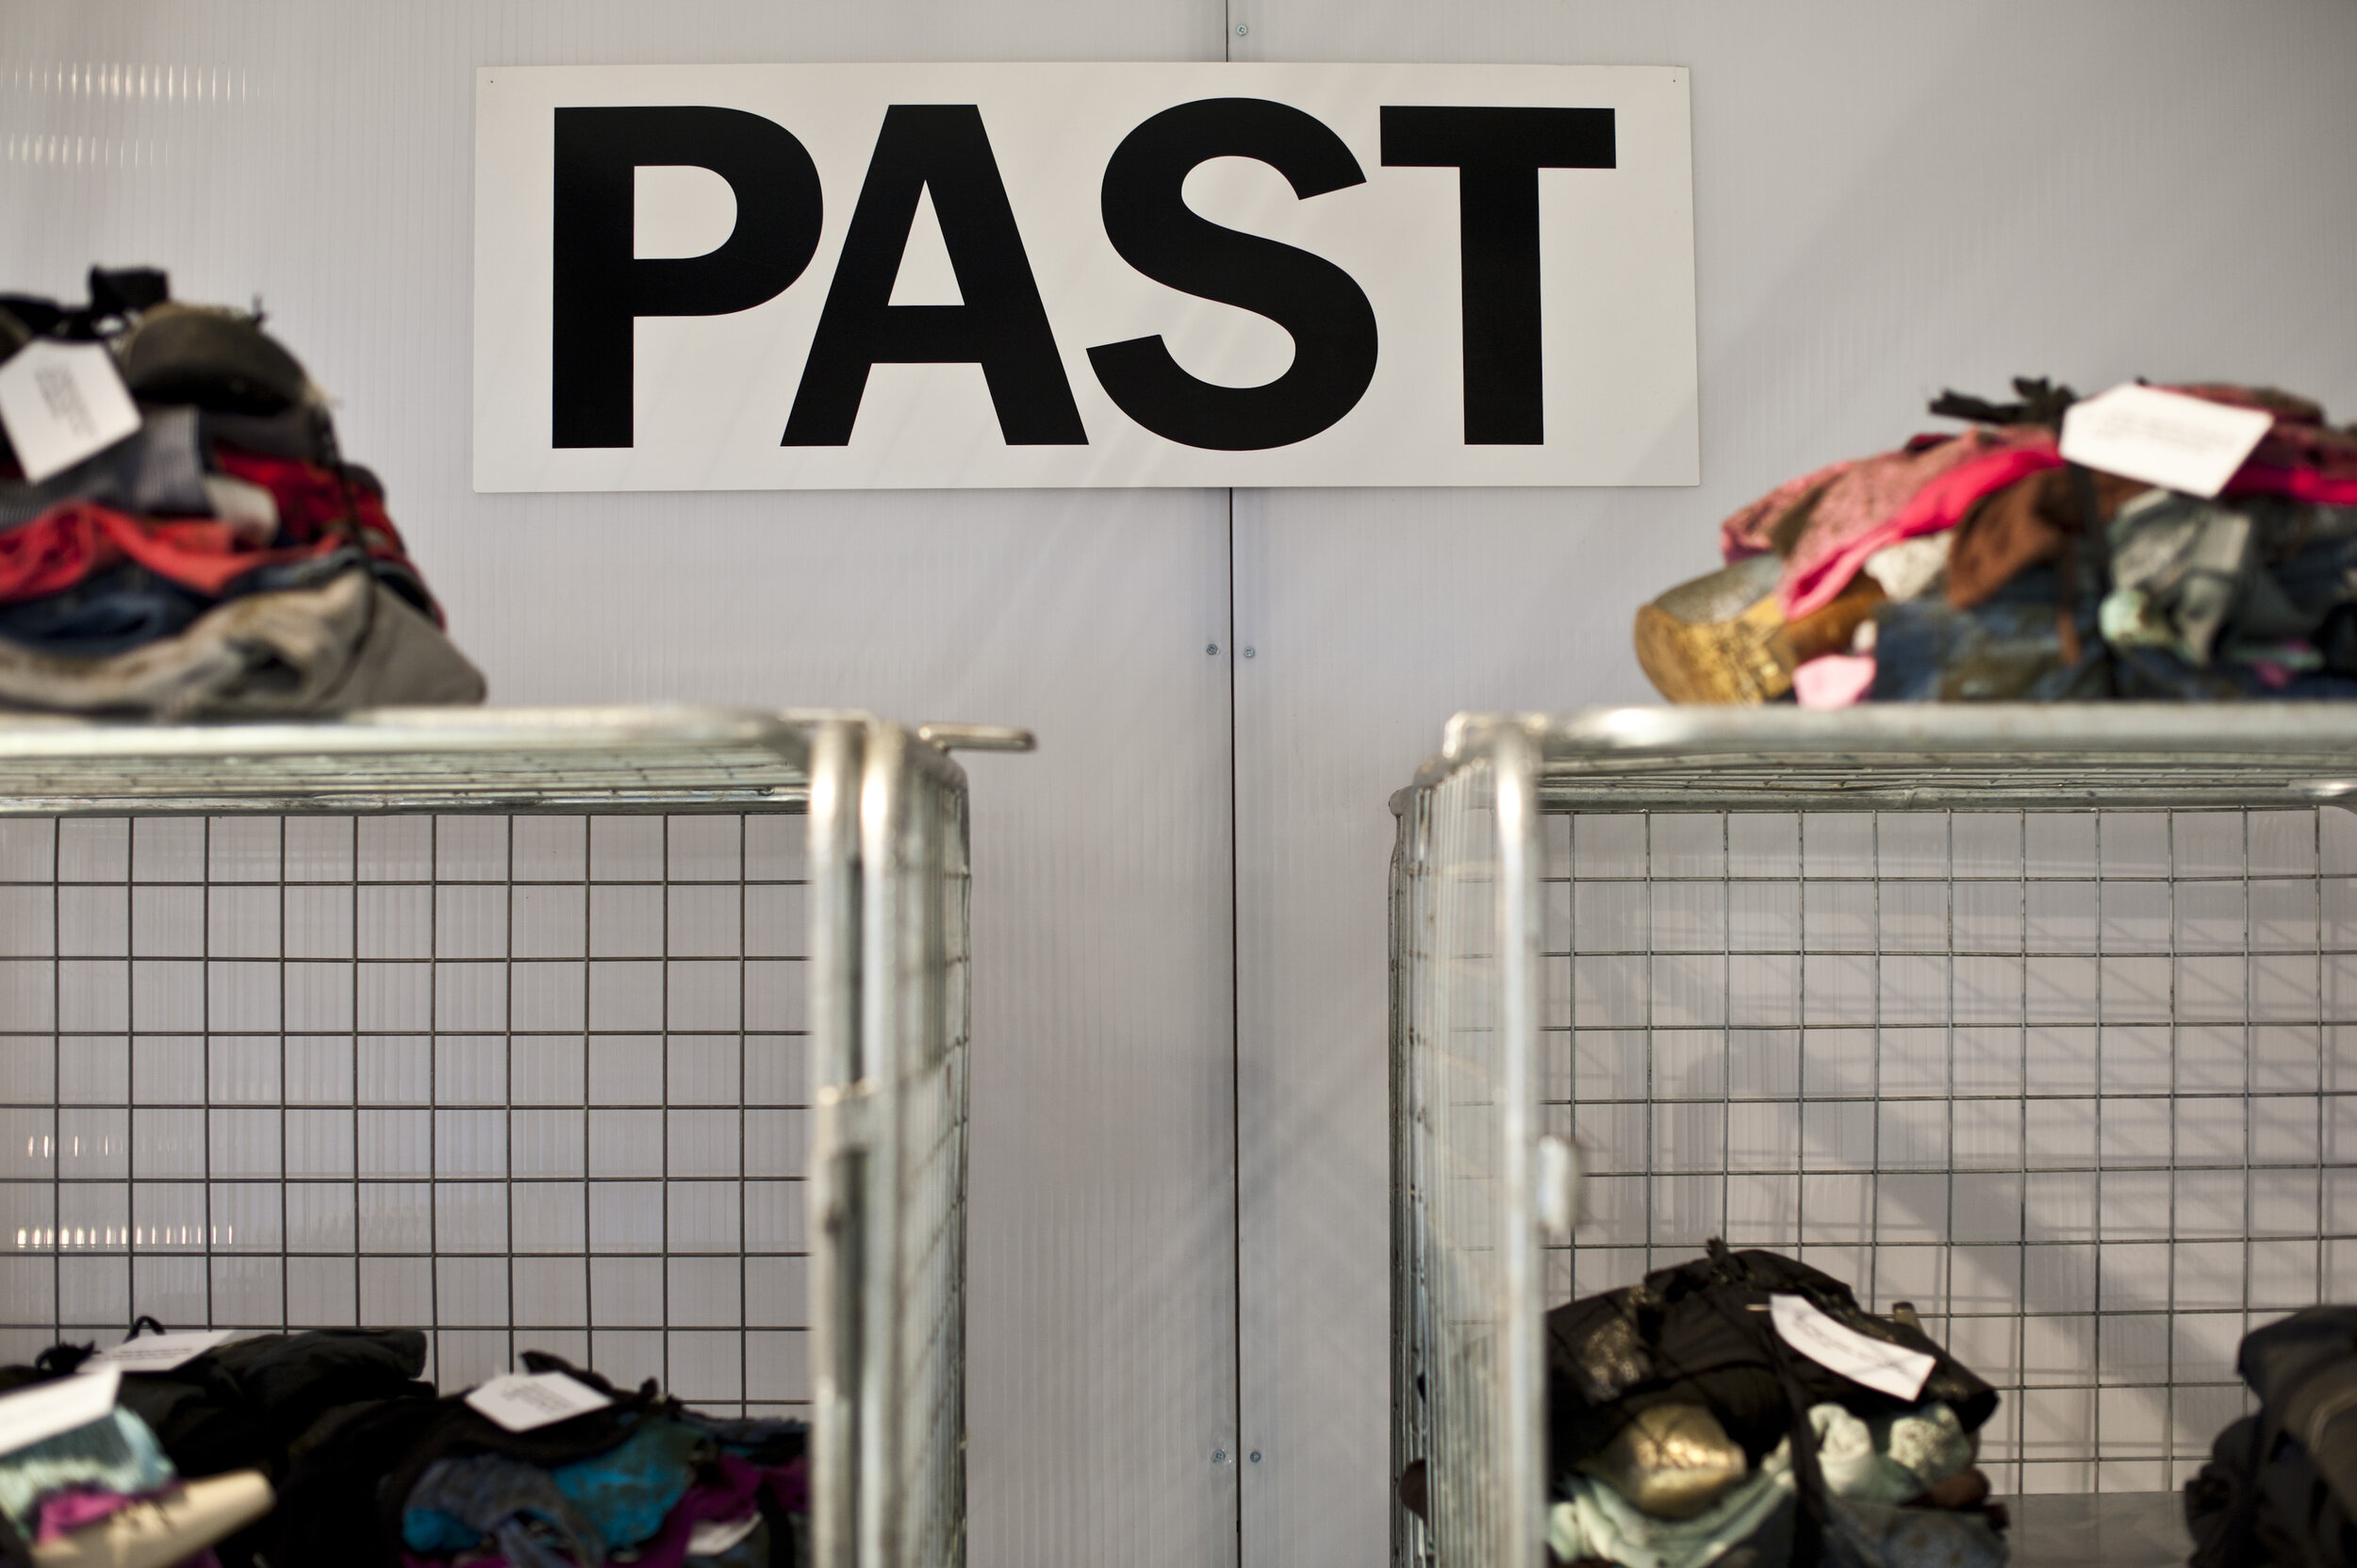  the word ‘past’ in large typeface is on the wall, objects sit on shelves below it. 